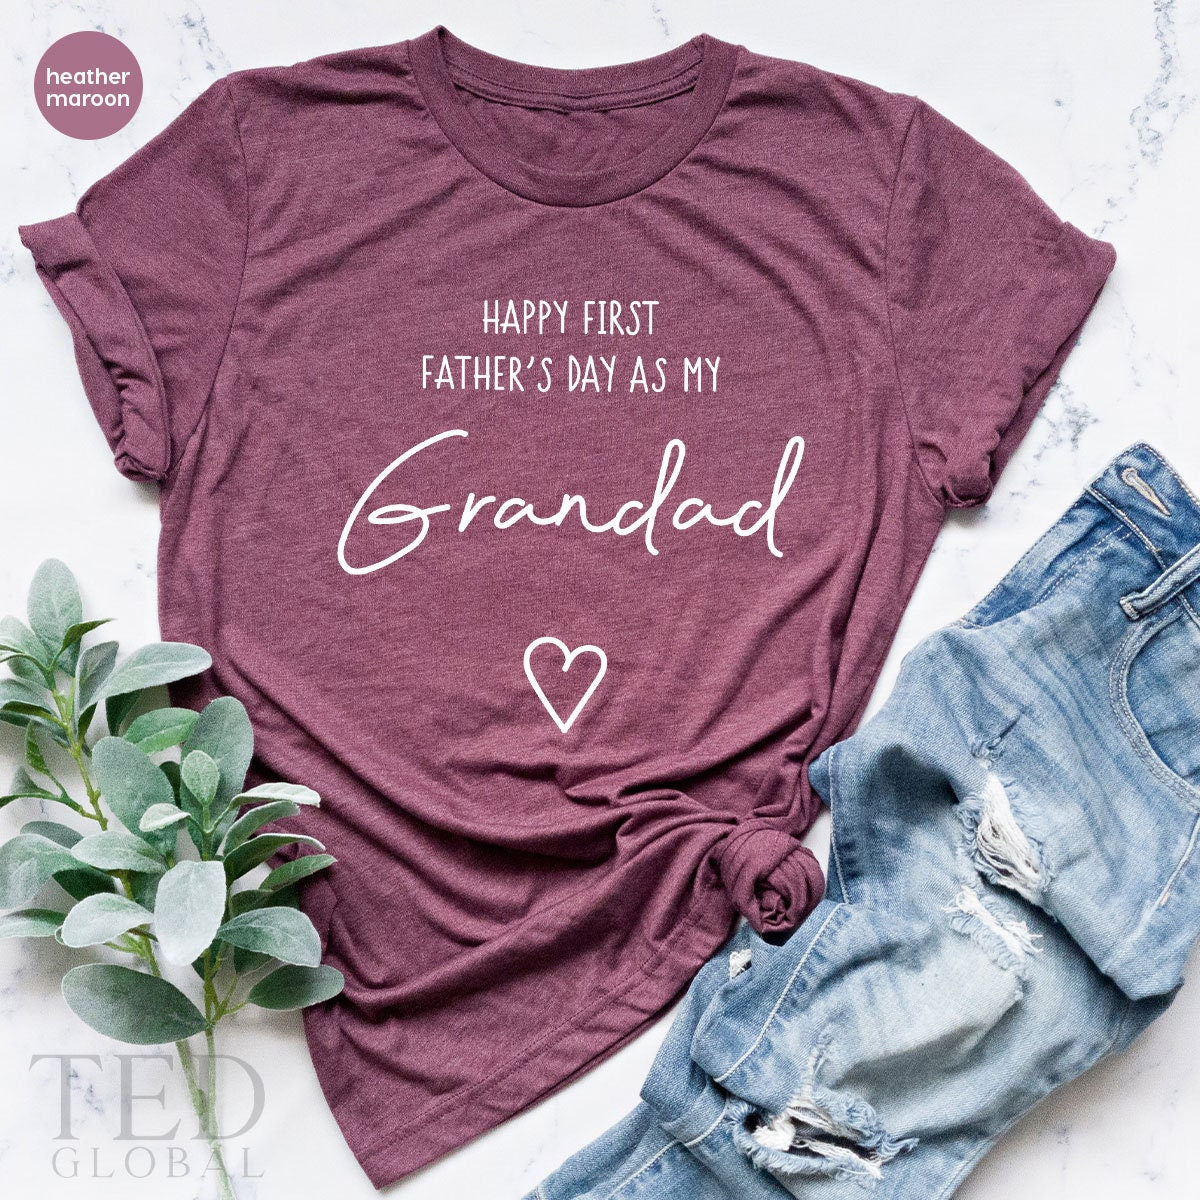 First Fathers Day Shirt, Grandad Shirt, New Grandpa Shirt, Grandpa Fathers Day Gift, Grandpa to Be Shirt, Baby Announcement for Dad